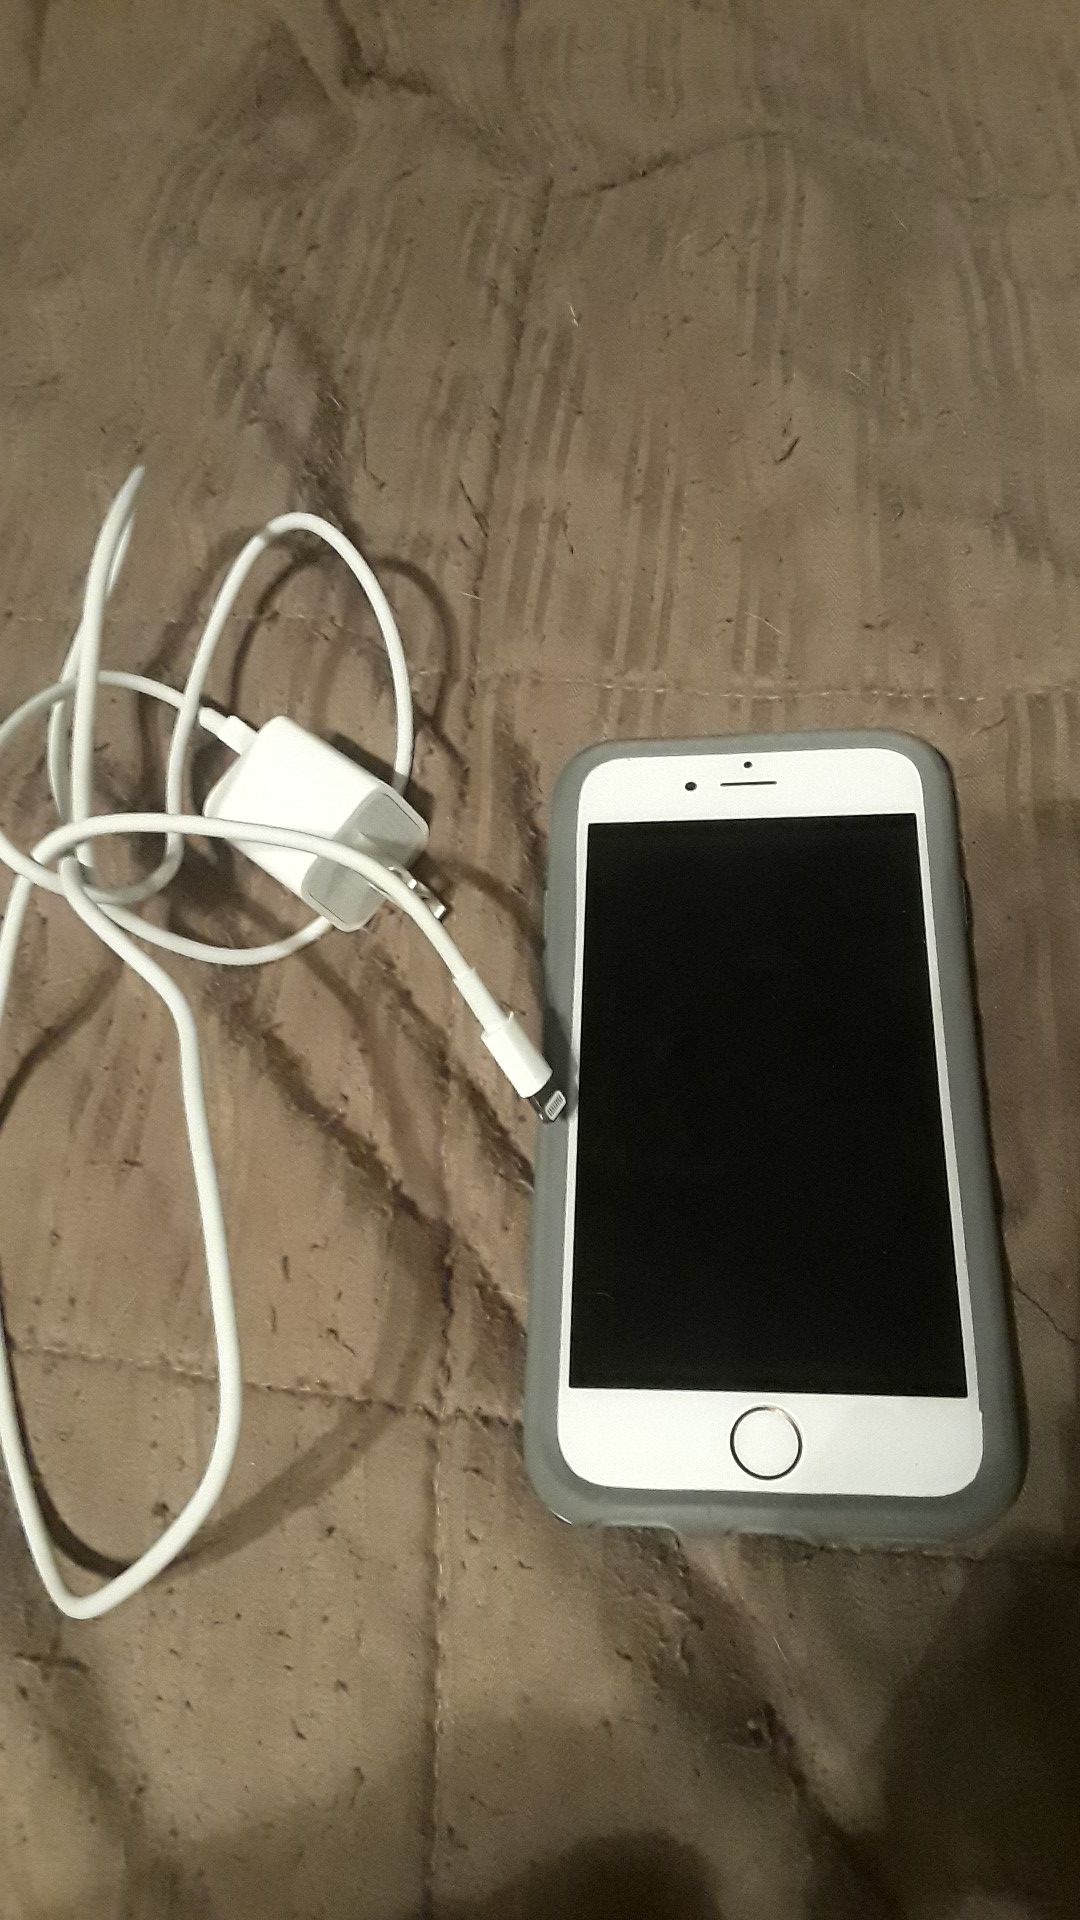 iPhone 6 - 1 month old